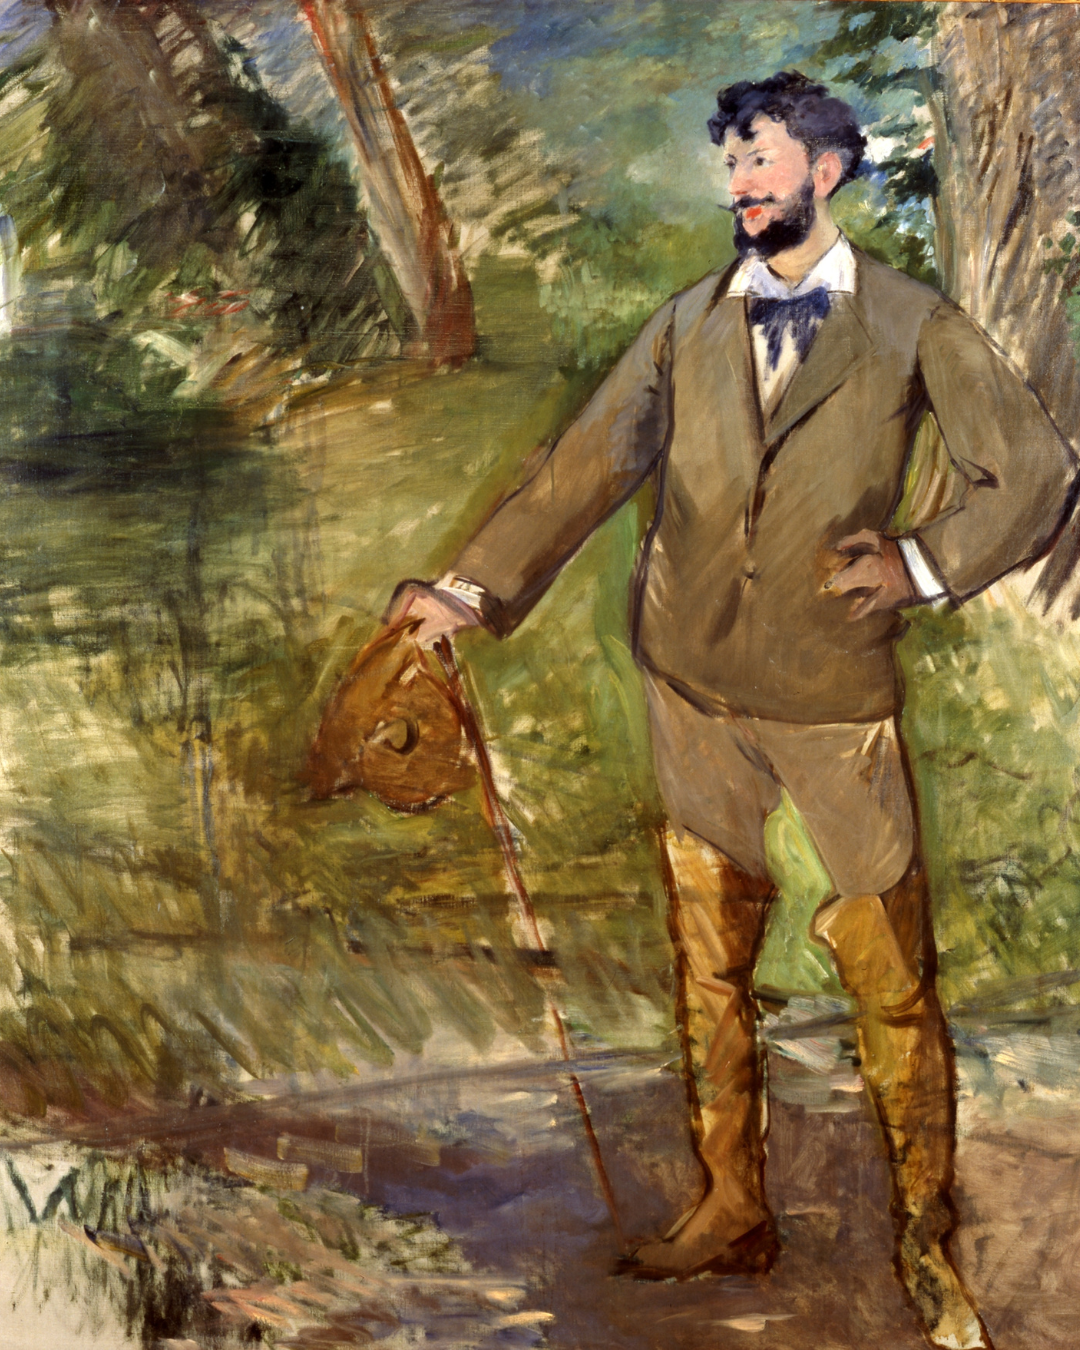 Painting of a man standing in a relaxed pose surrounded by nature. The brushstrokes are loose and expressive.